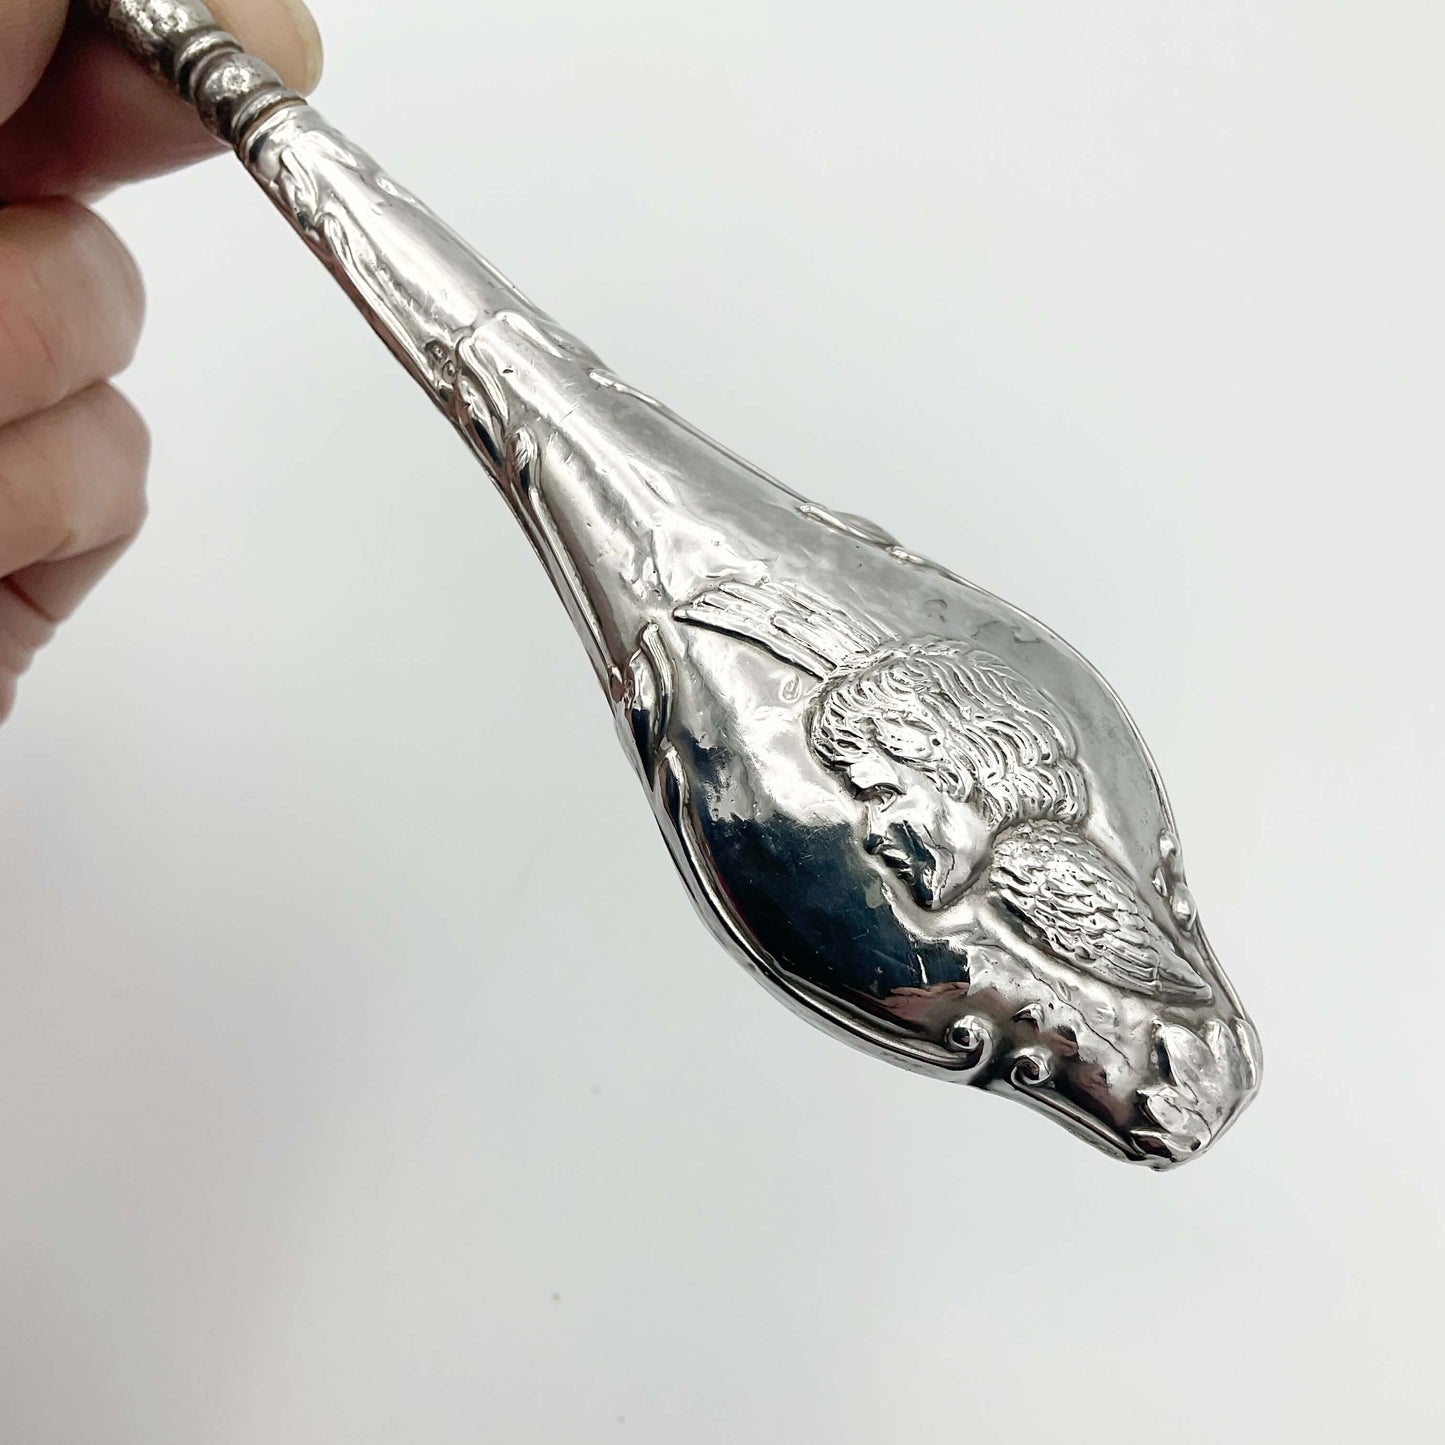 close up of a winged cherub on the silver handle of the button hook